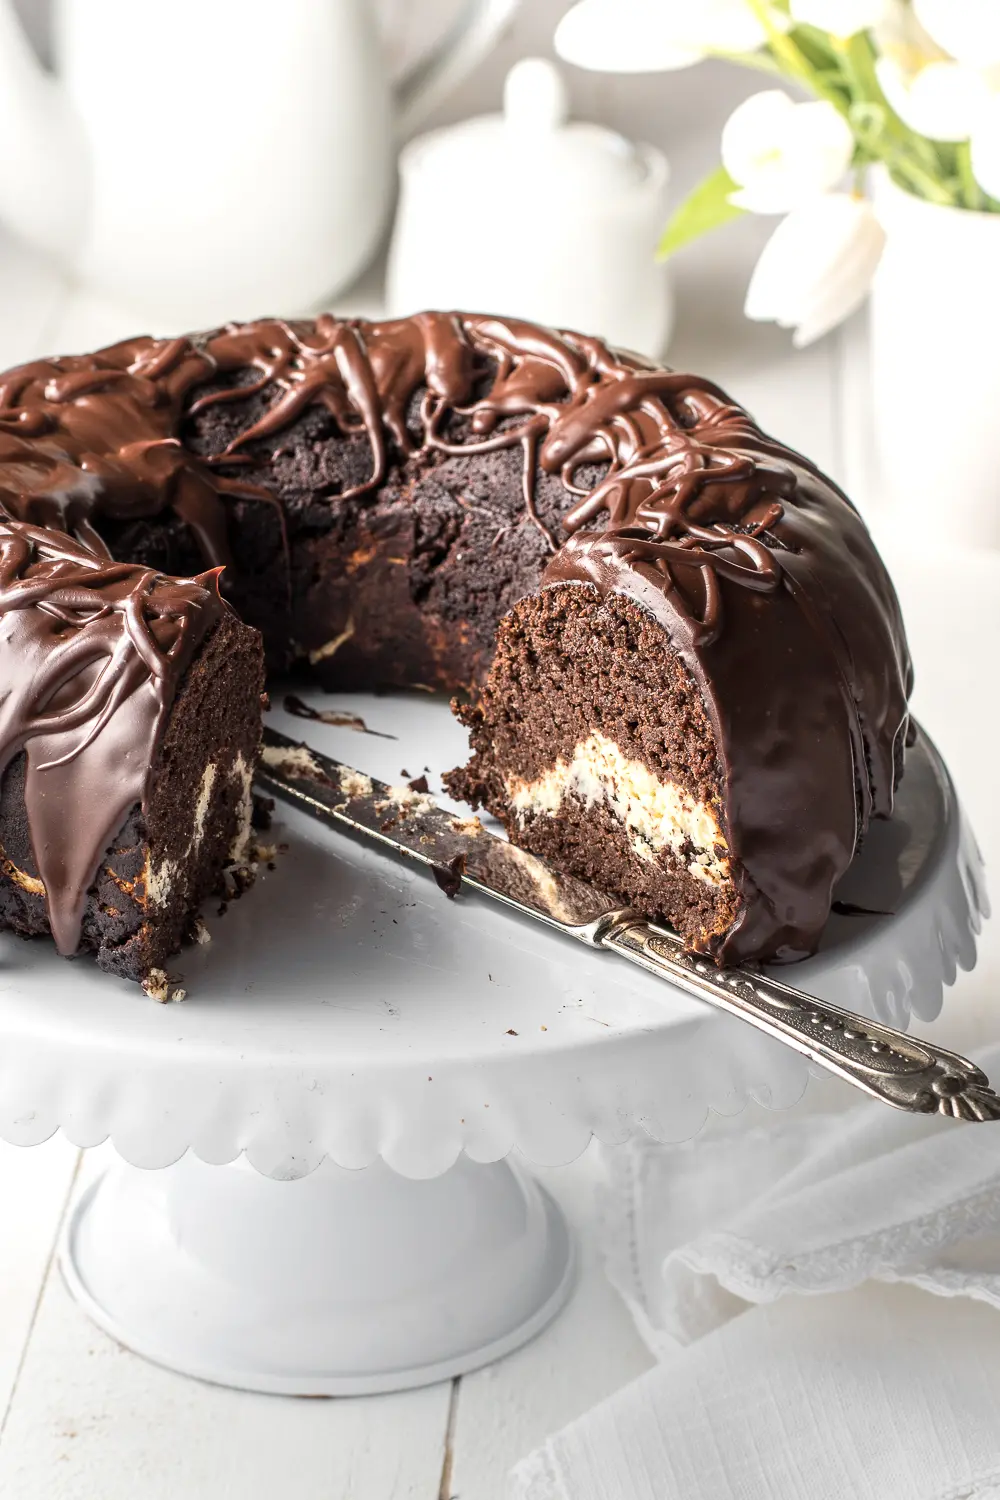 A sliced Chocolate bundt cake on a white cake stand on a white background